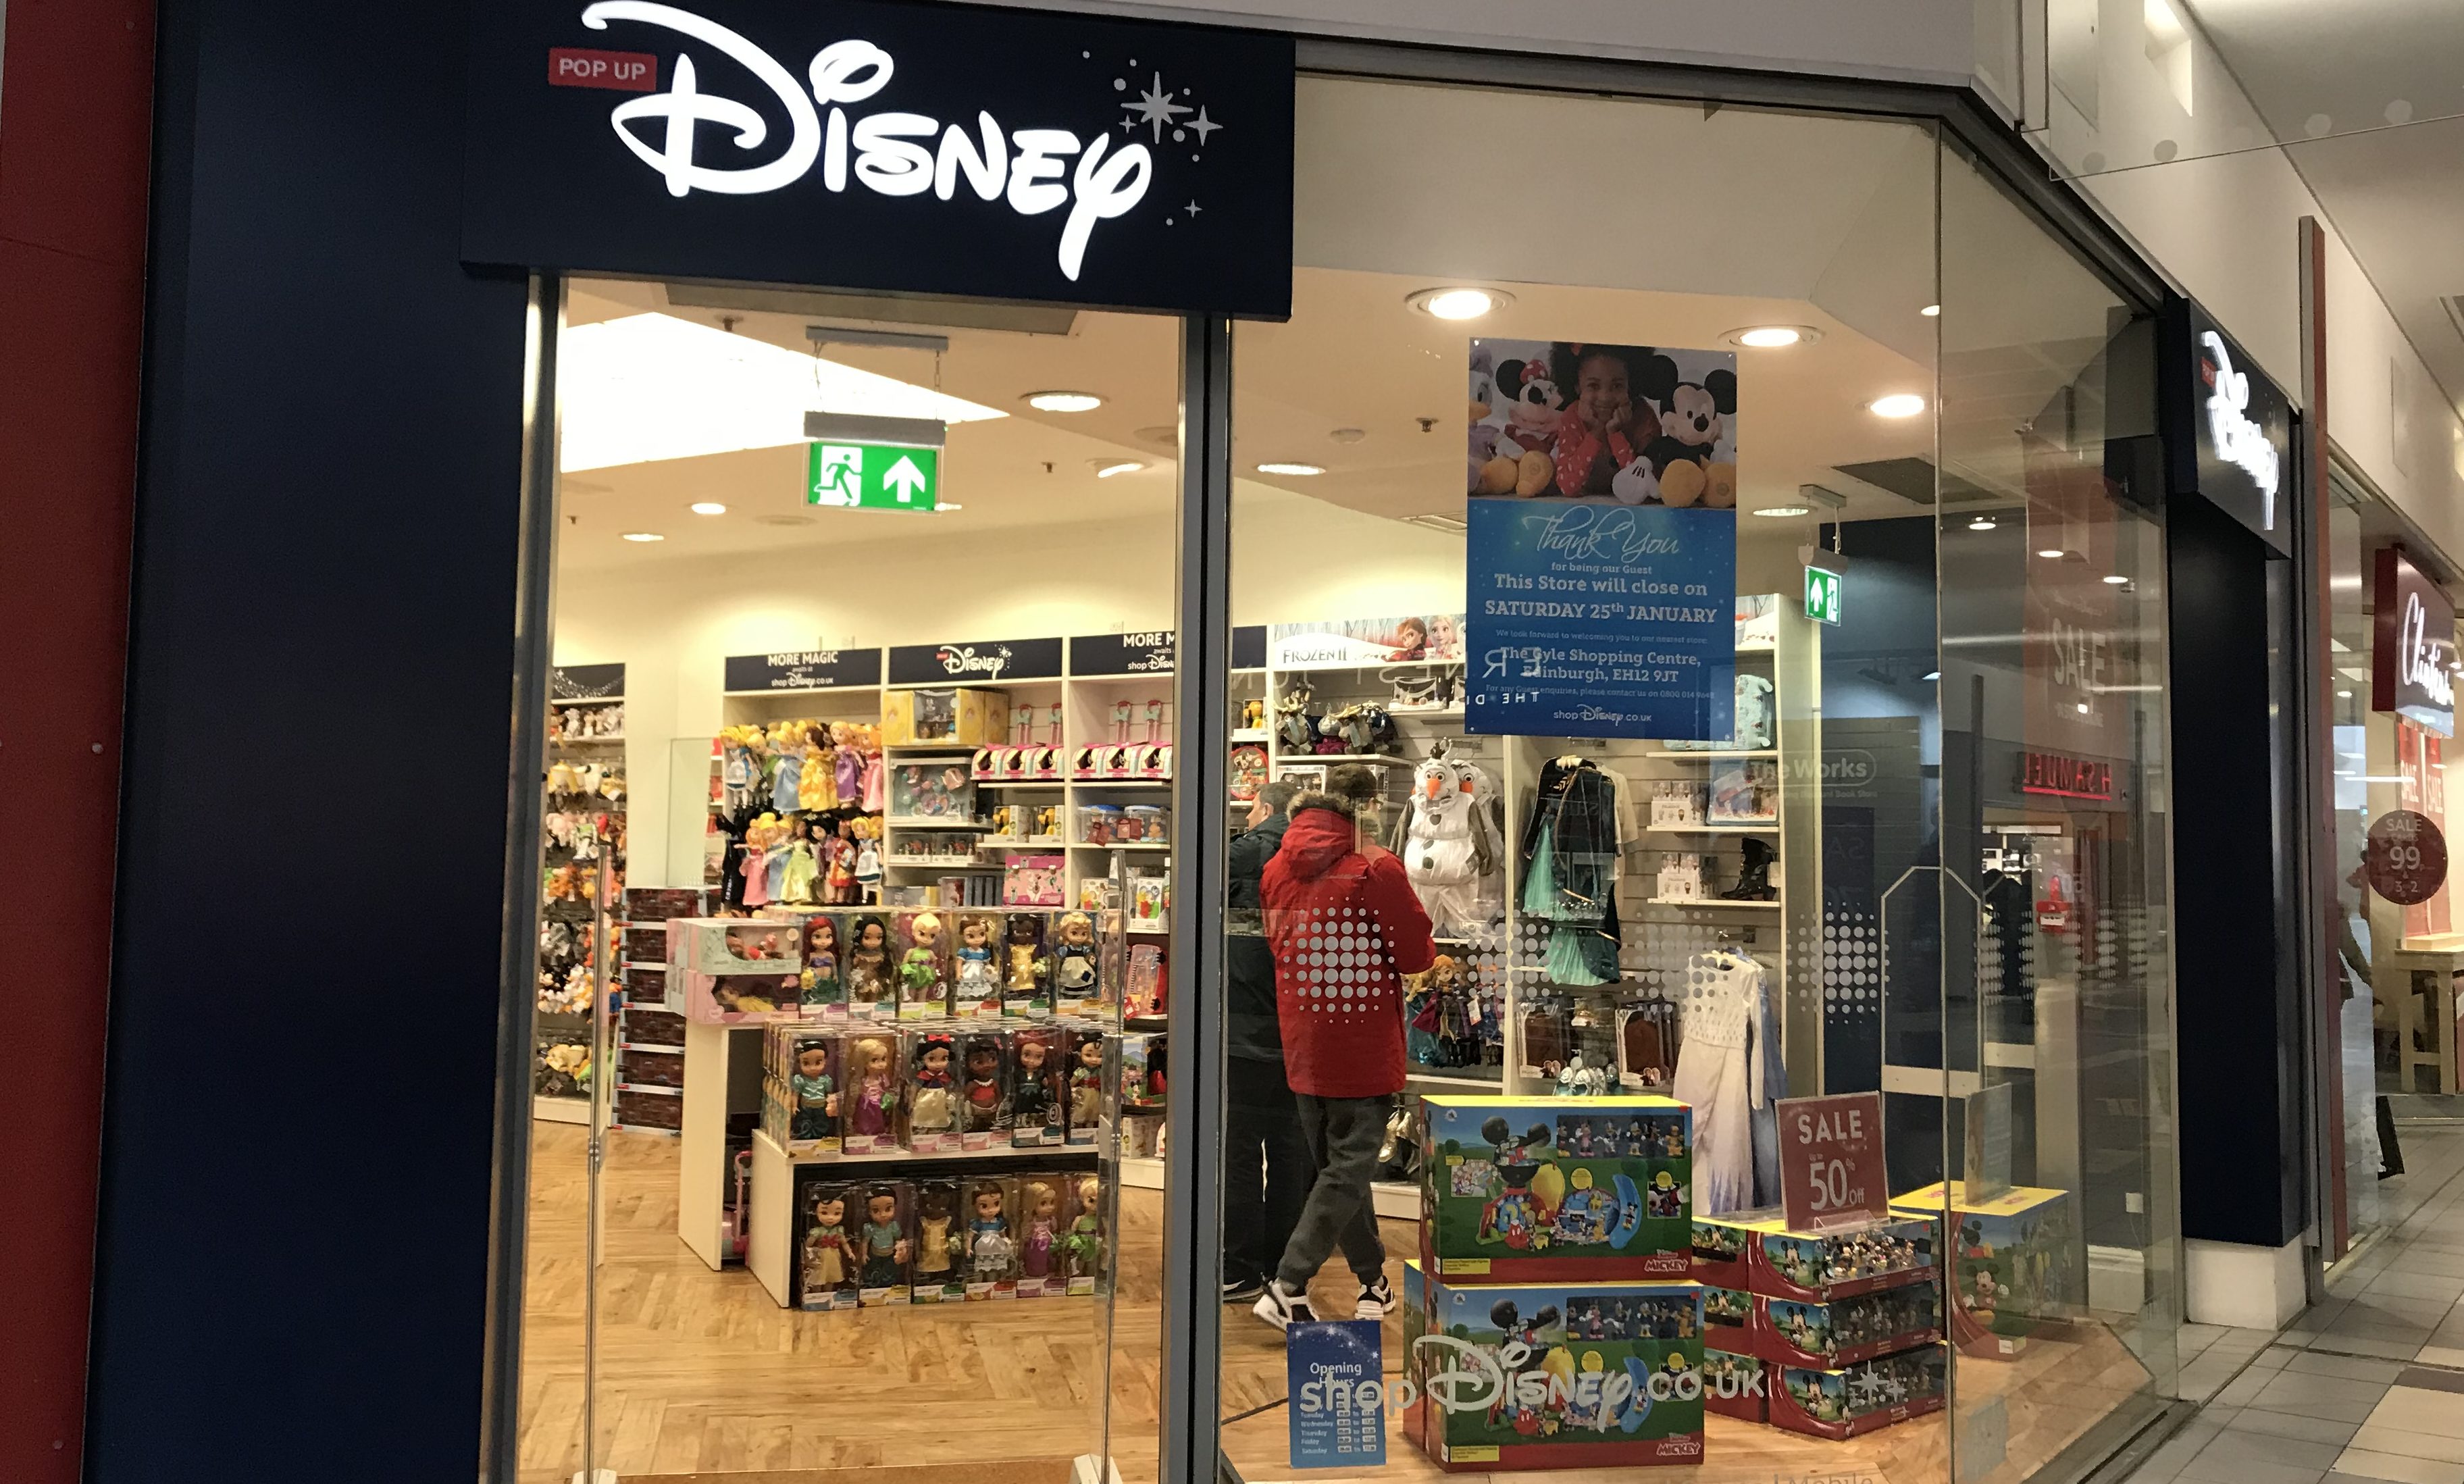 The Disney store in Perth which is closing its doors on January 25.